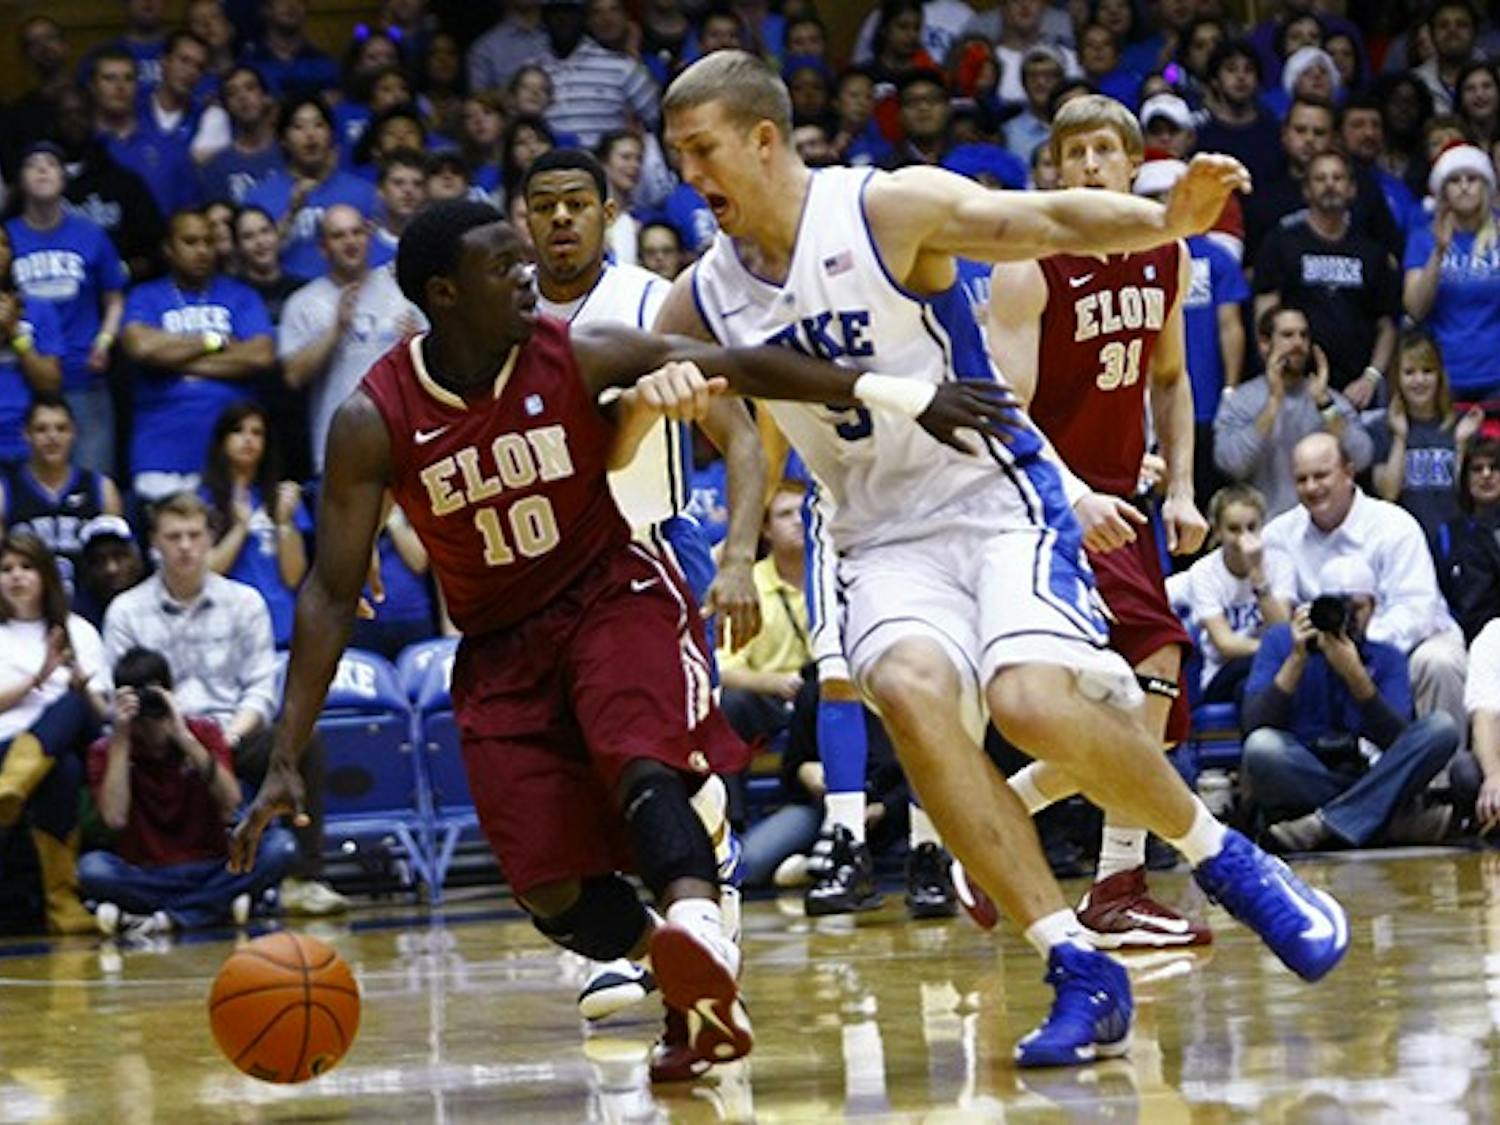 Mason Plumlee had his seventh double-double of the season against Elon, scoring 21 points and pulling down 15 rebounds.